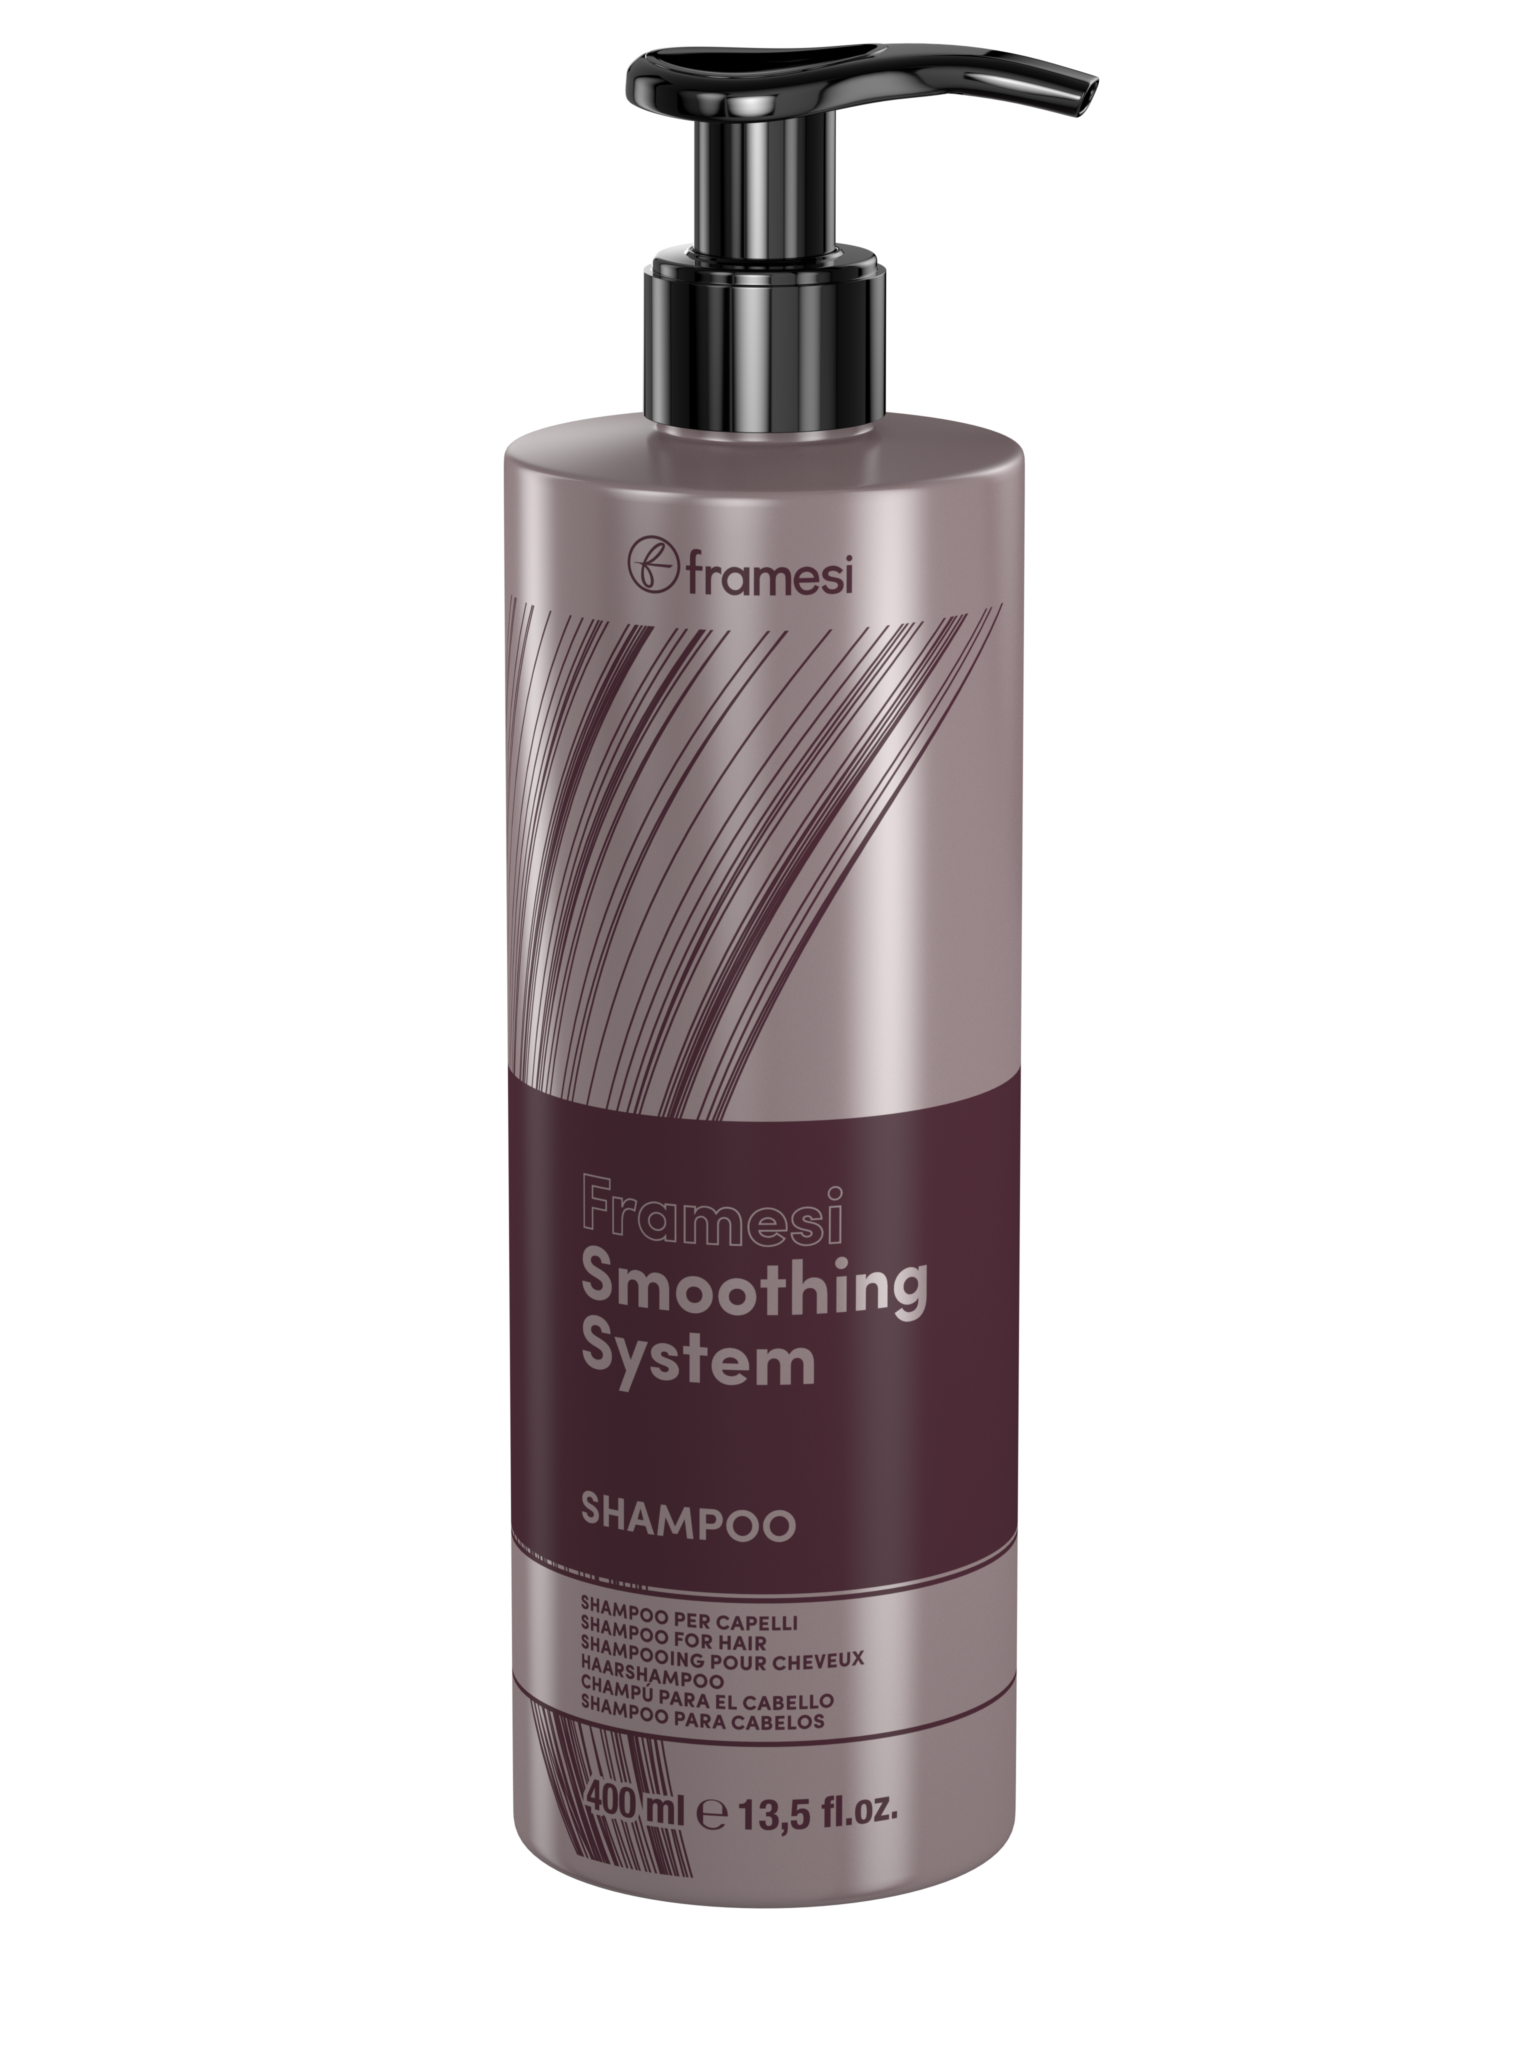 https://www.framesiprofessional.com/wp-content/uploads/2022/08/FRAMESI-SMOOTHING-SYSTEM_SHAMPOO_400-ML-1536x2048.png